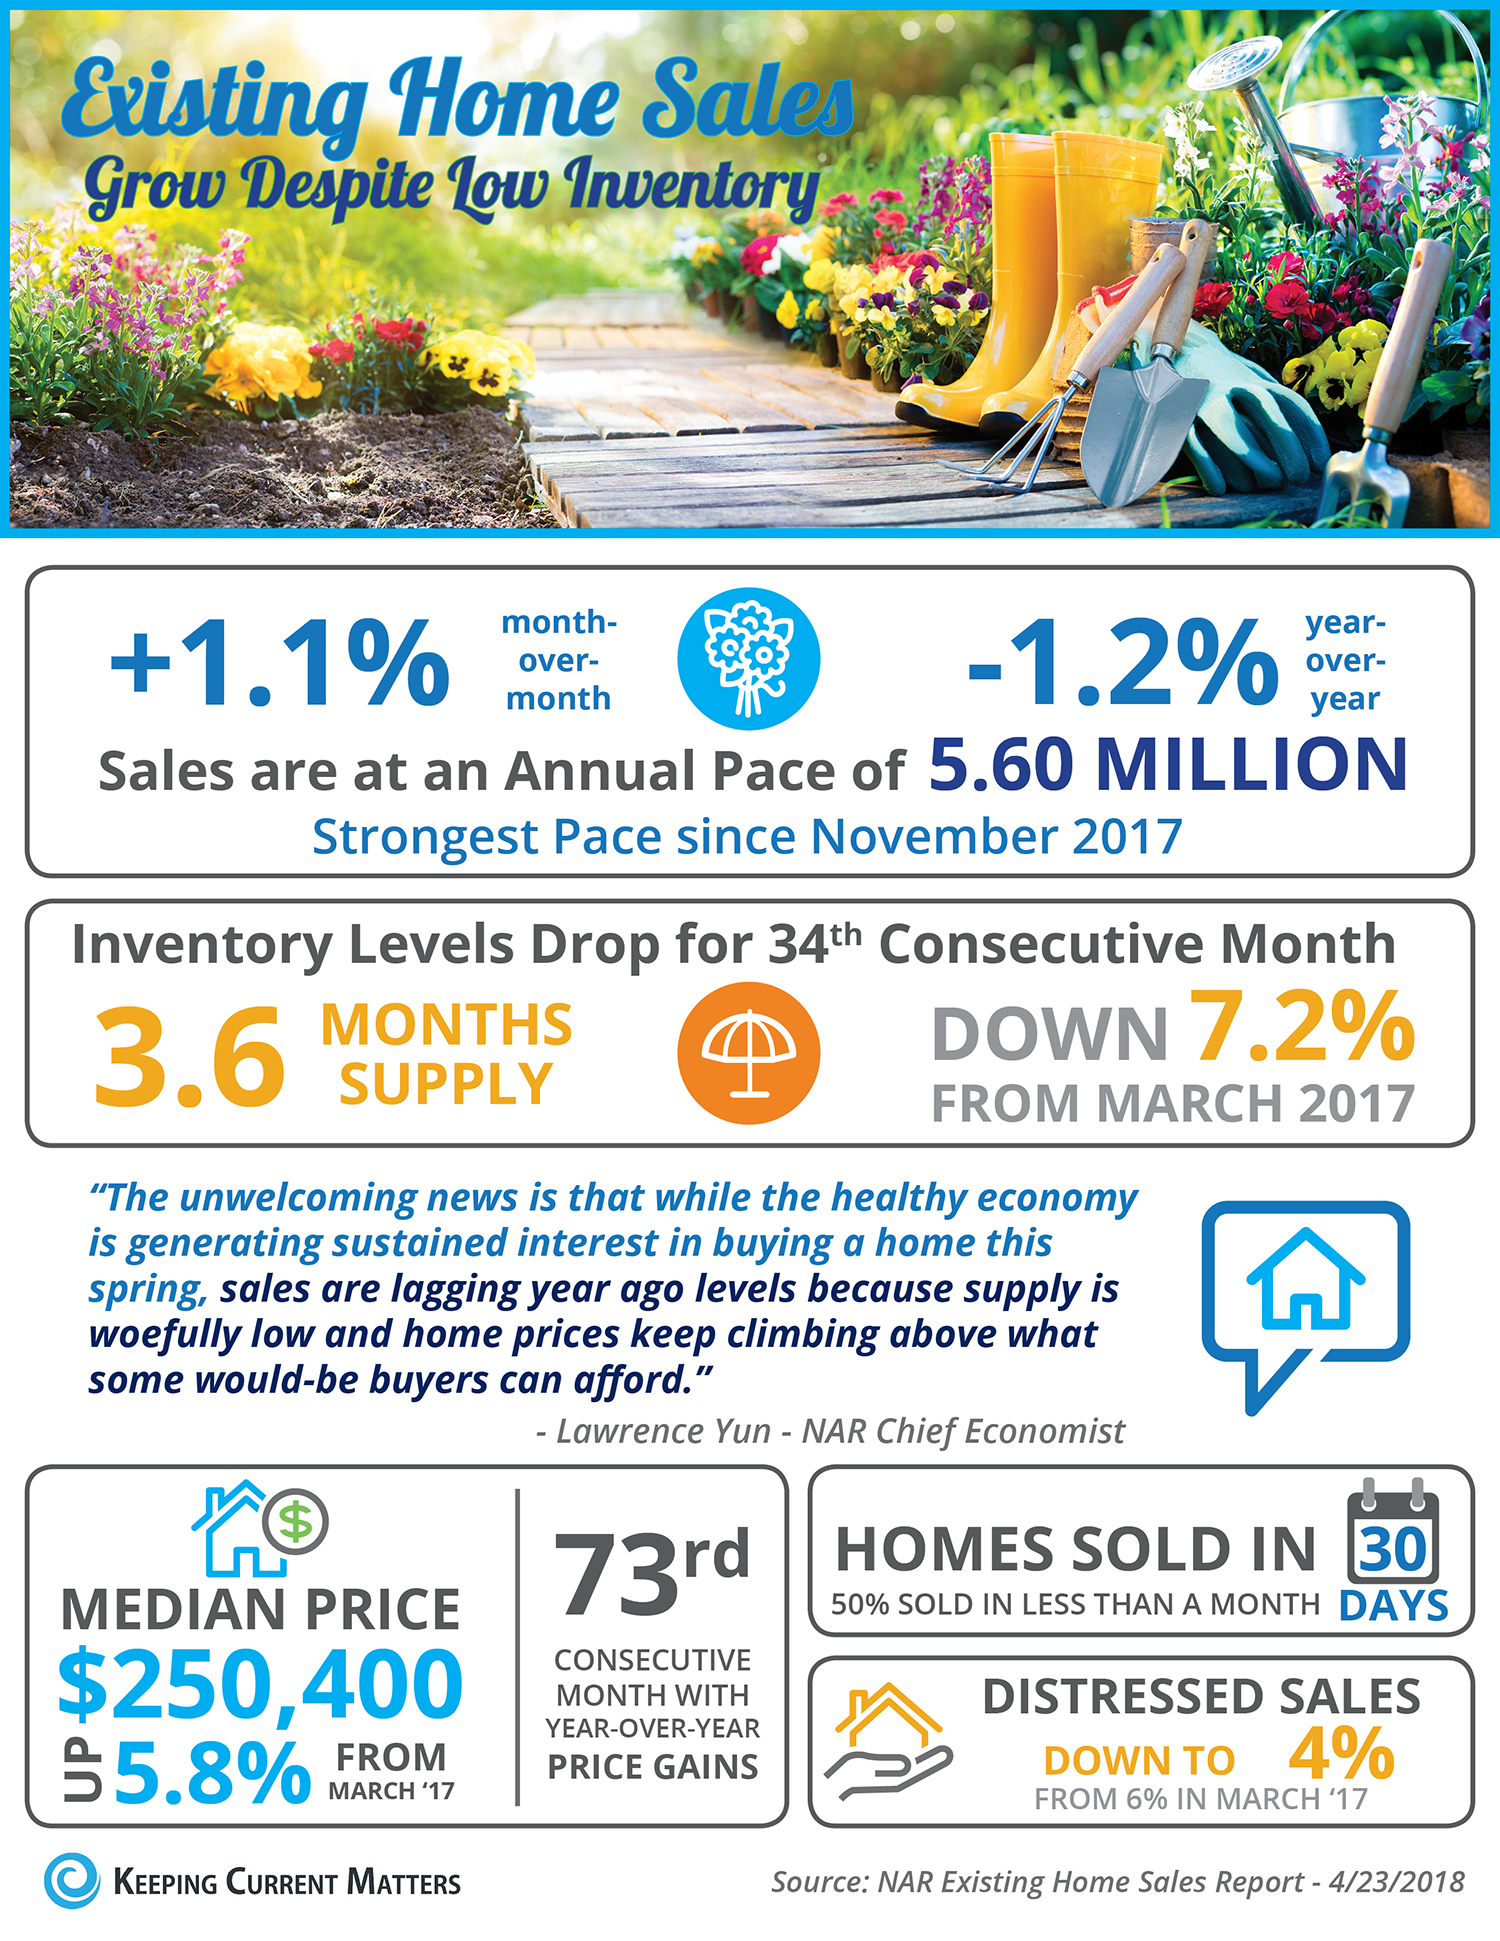 Exisiting Home Sales Infographic